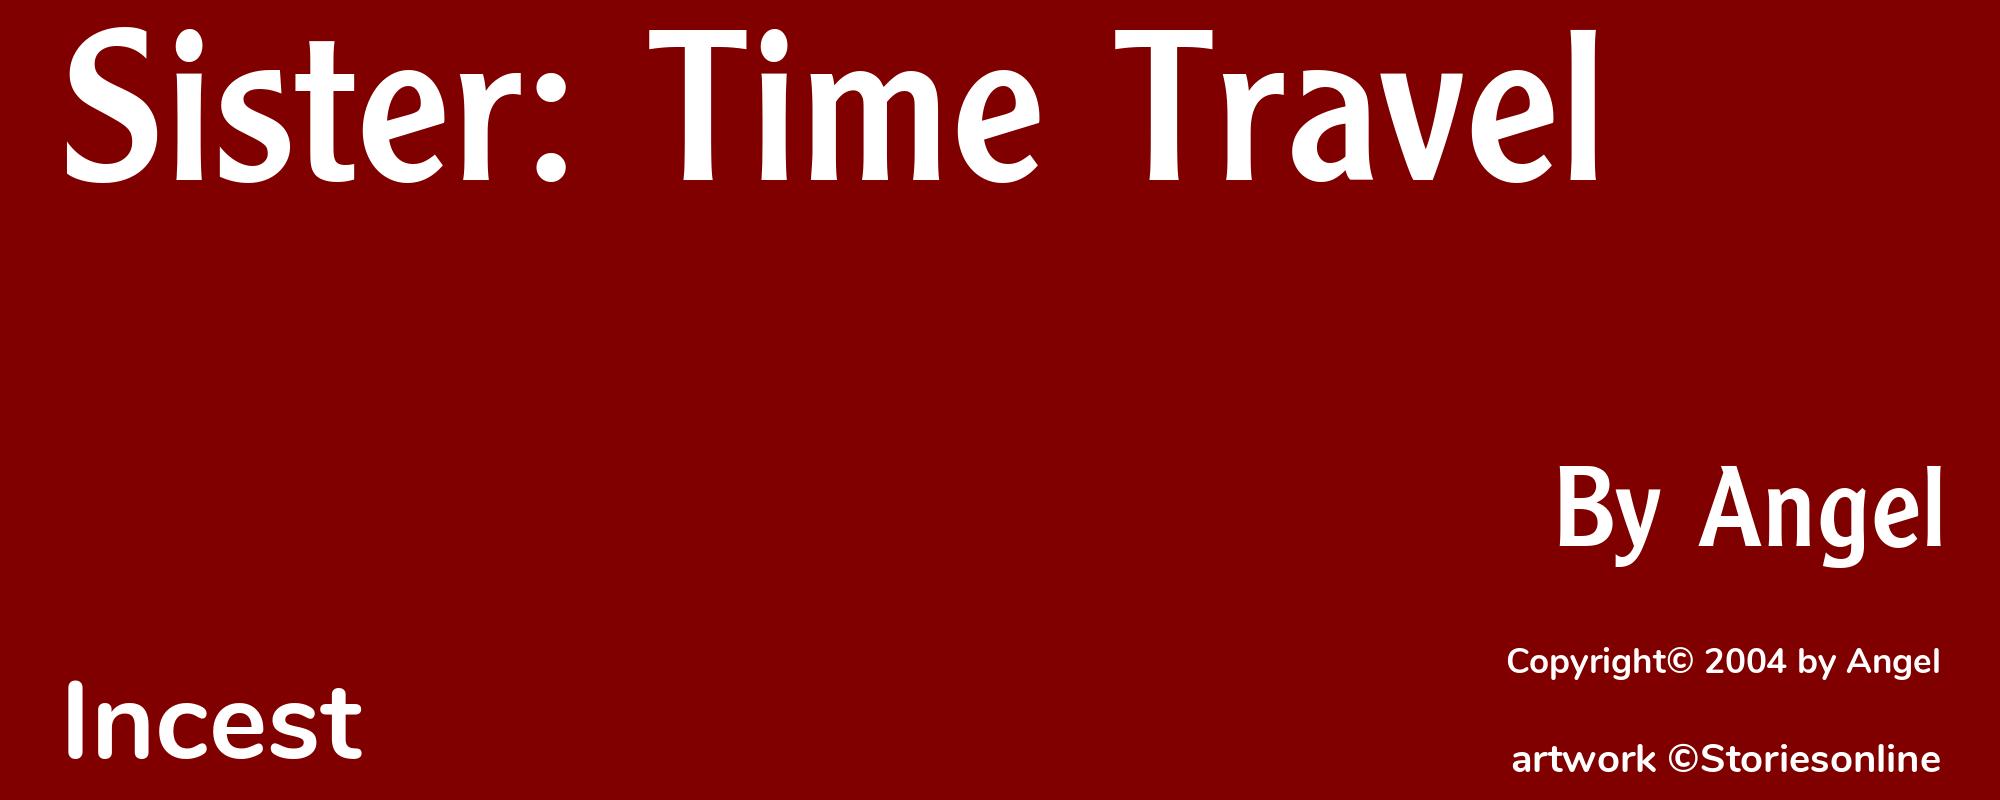 Sister: Time Travel - Cover